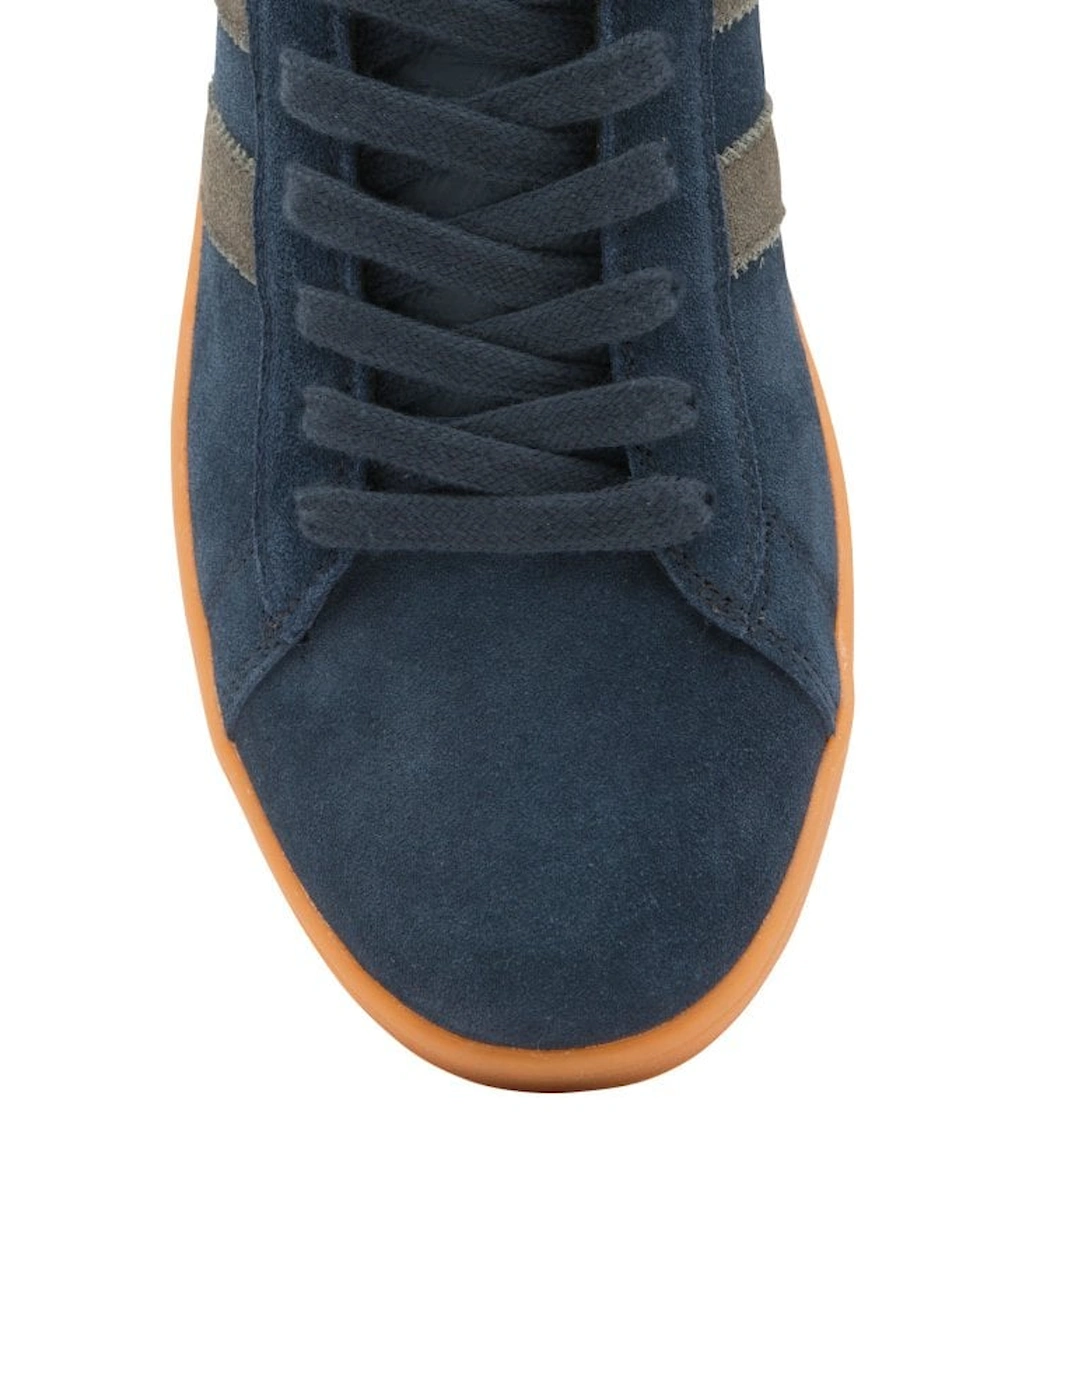 Equipe Suede Mens Trainers